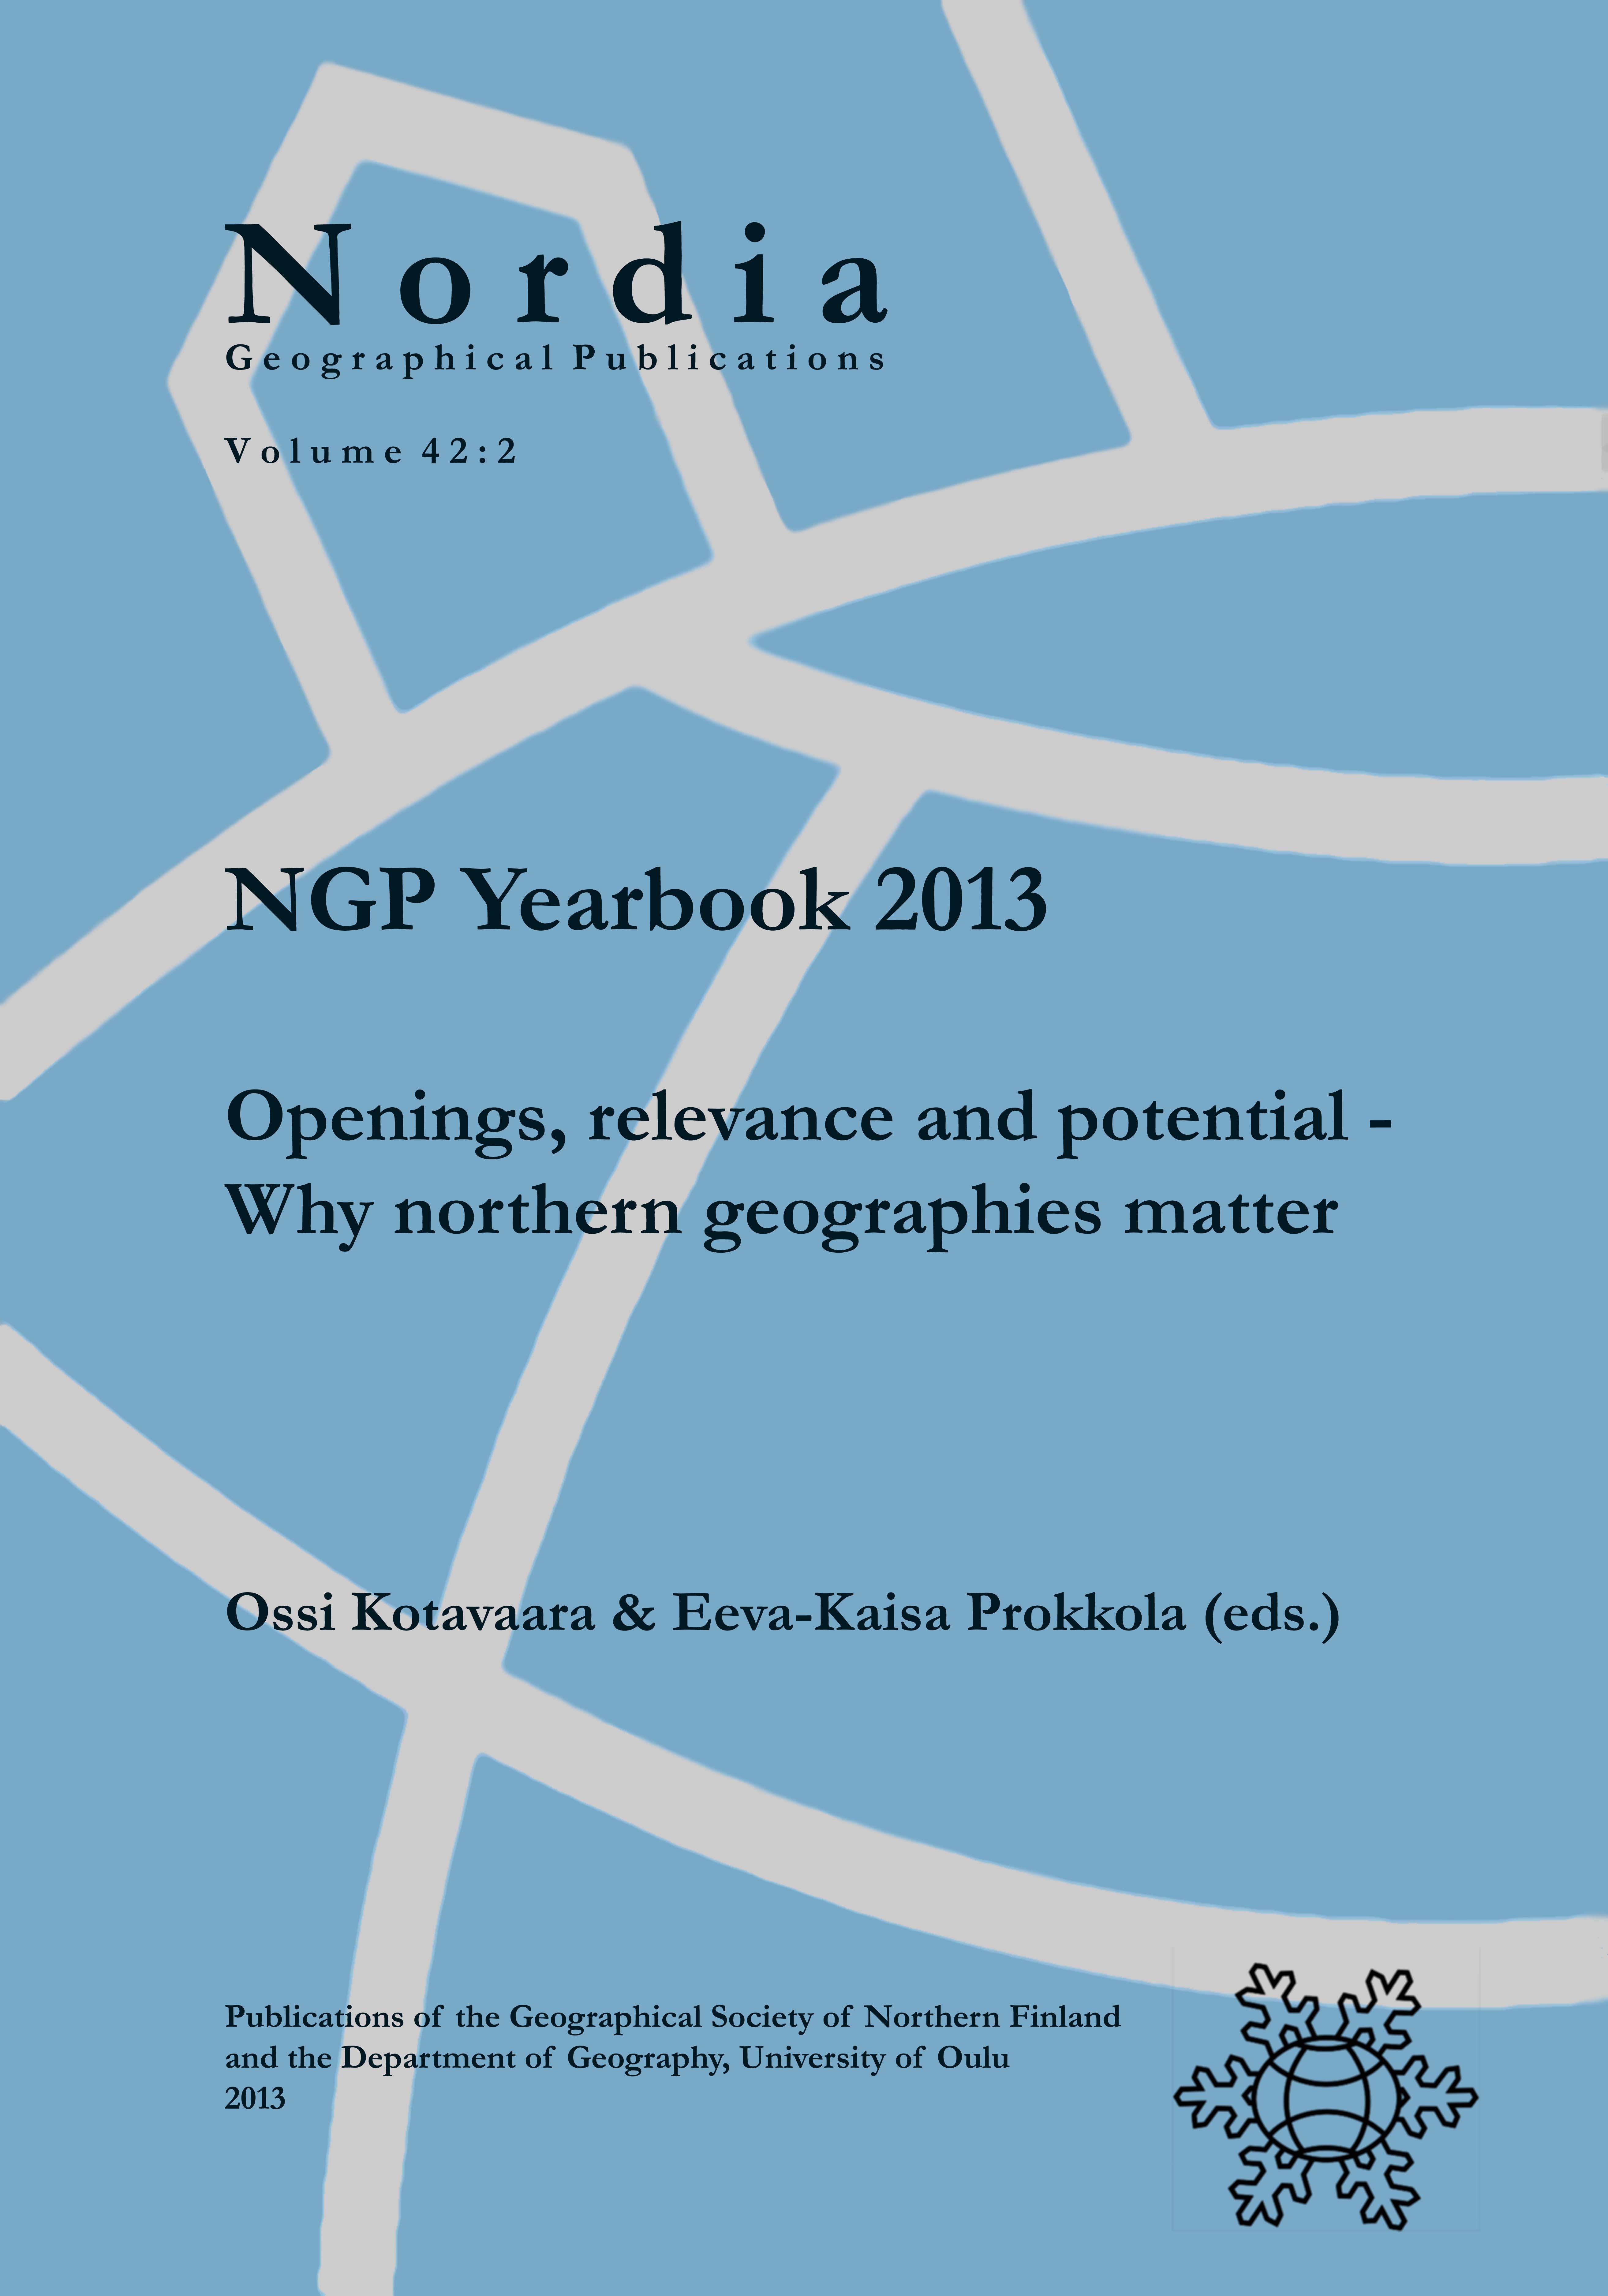 					View Vol. 42 No. 2: NGP Yearbook 2013: Openings, relevance and potential – Why northern geographies matter
				